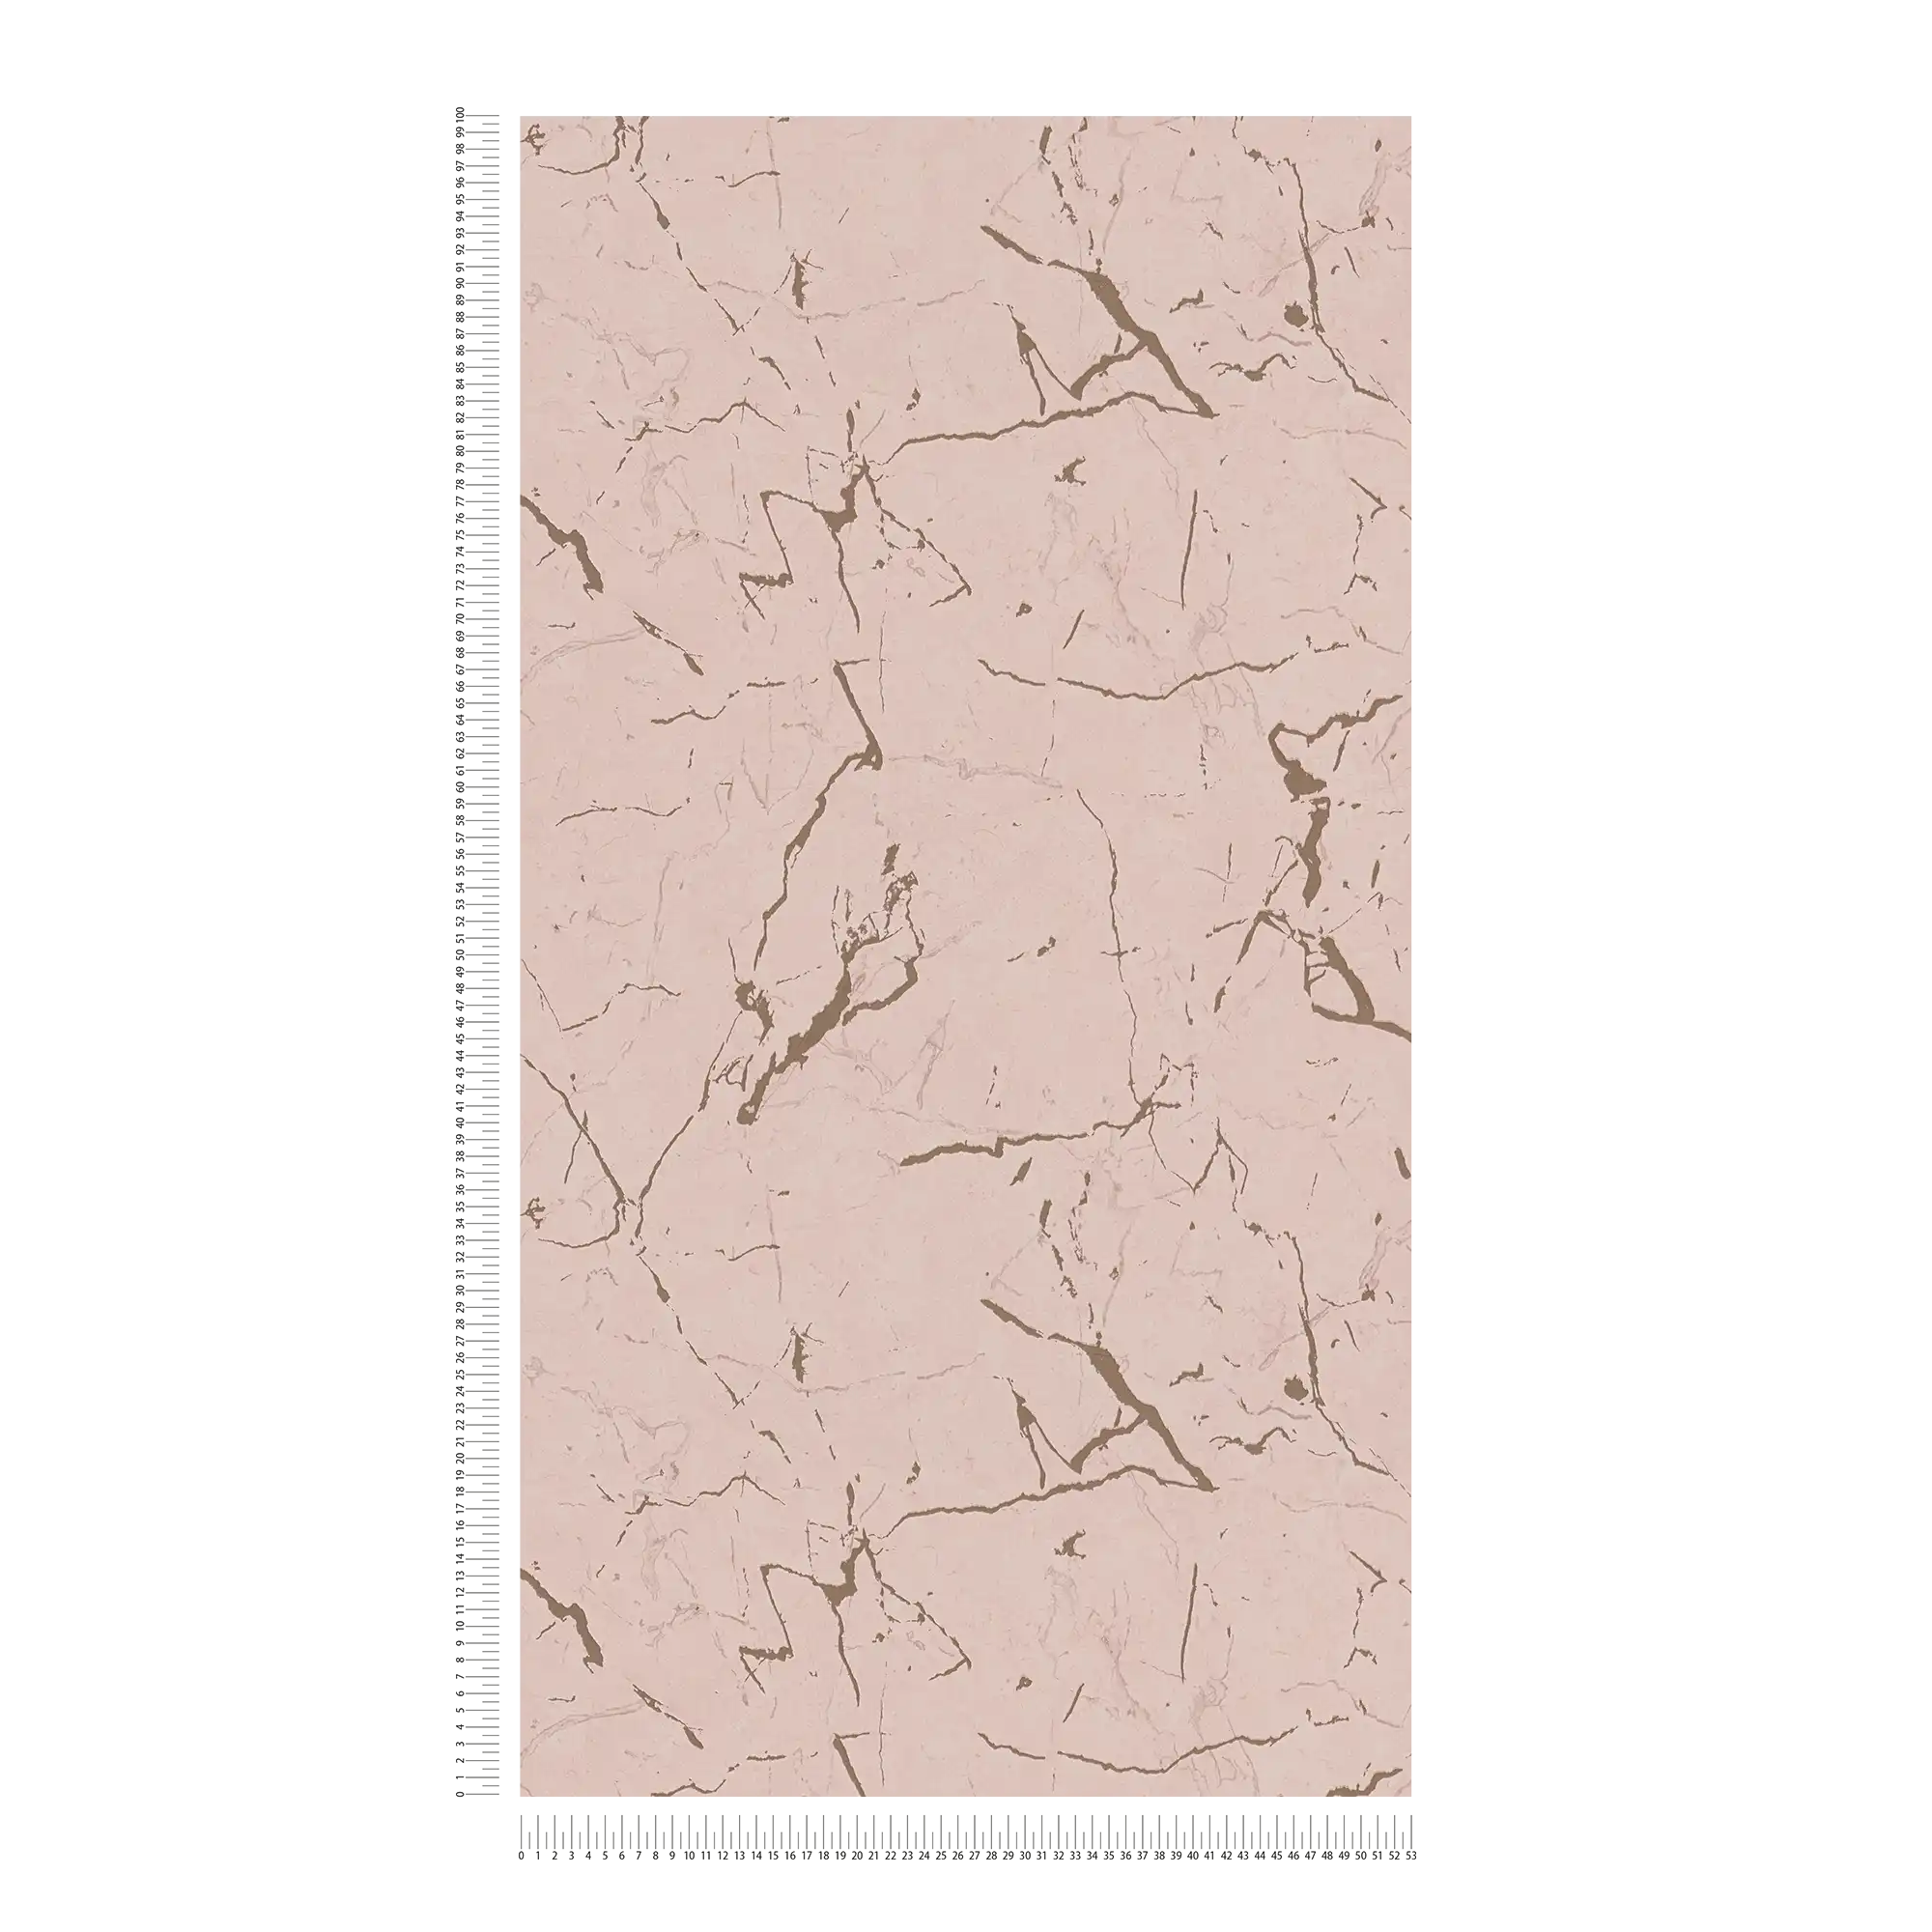             Pink marble wallpaper with gold accents - Metallic, Pink
        